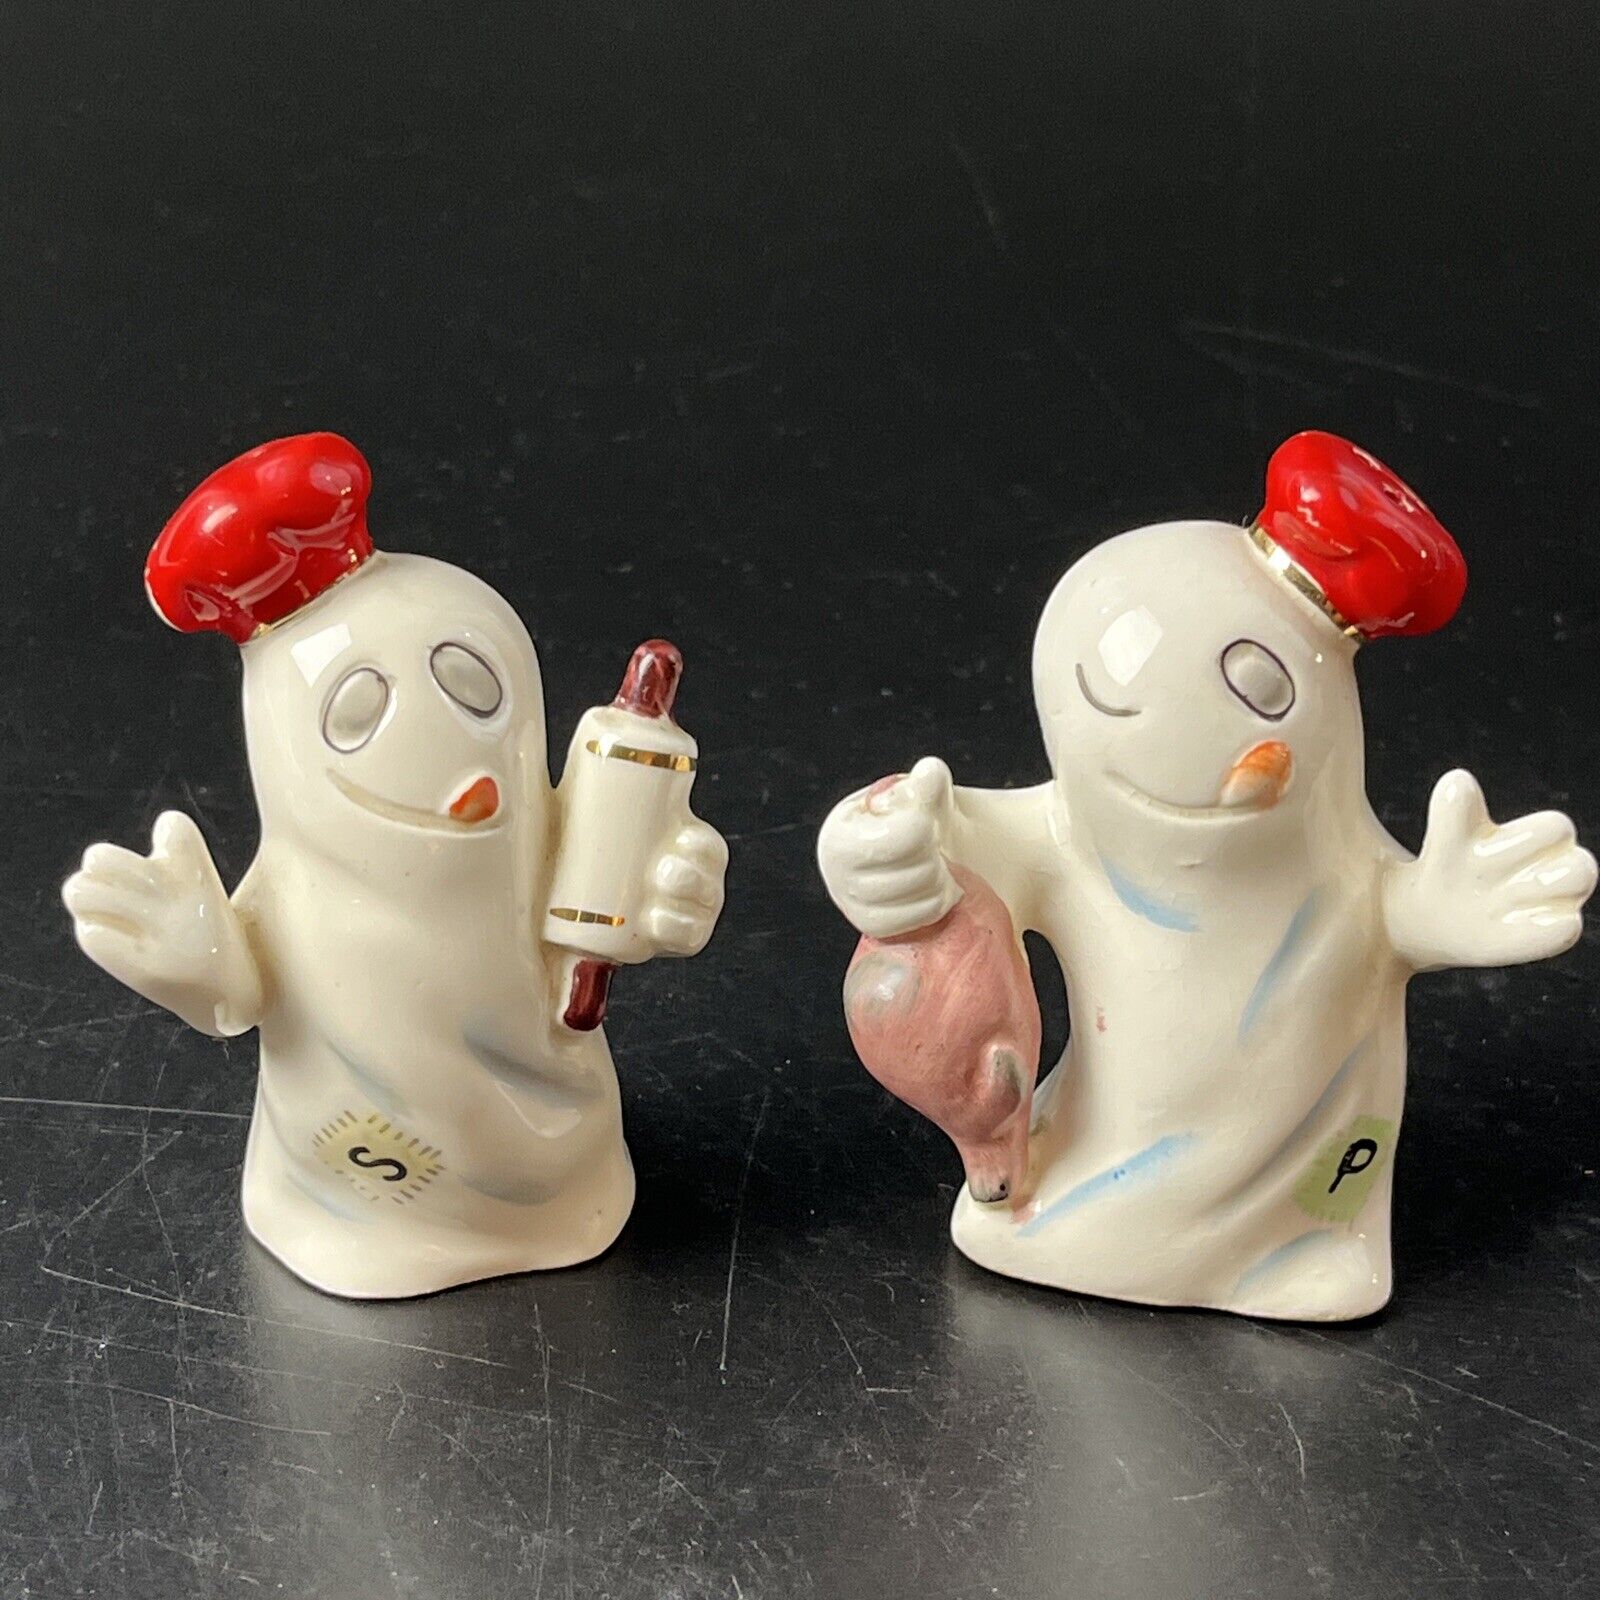 Vintage Ghost In Chefs Red Hats Salt & Pepper Shakers Funny Yummy Japan Ceramic